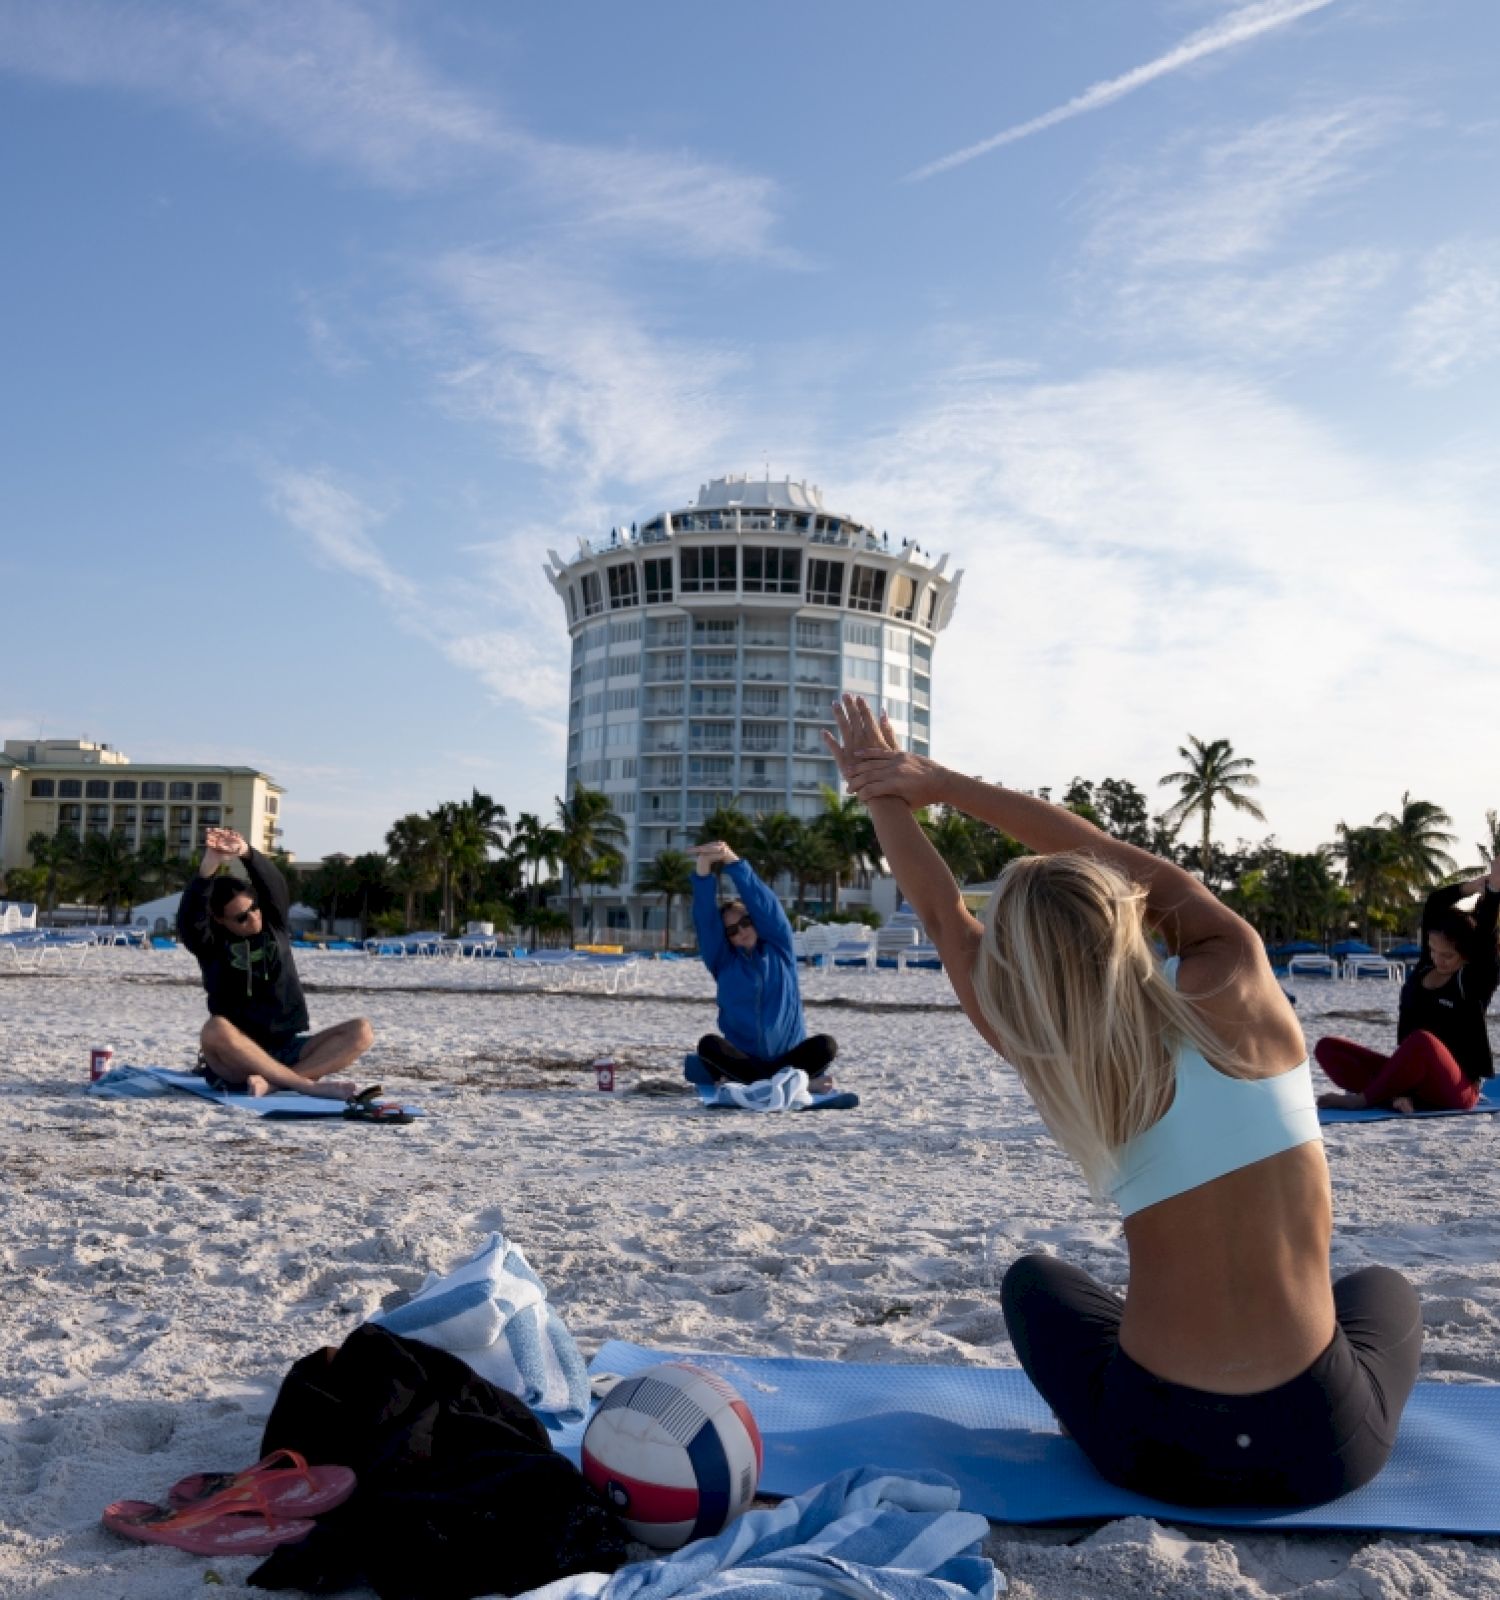 People practice yoga on a beach with buildings in the background.